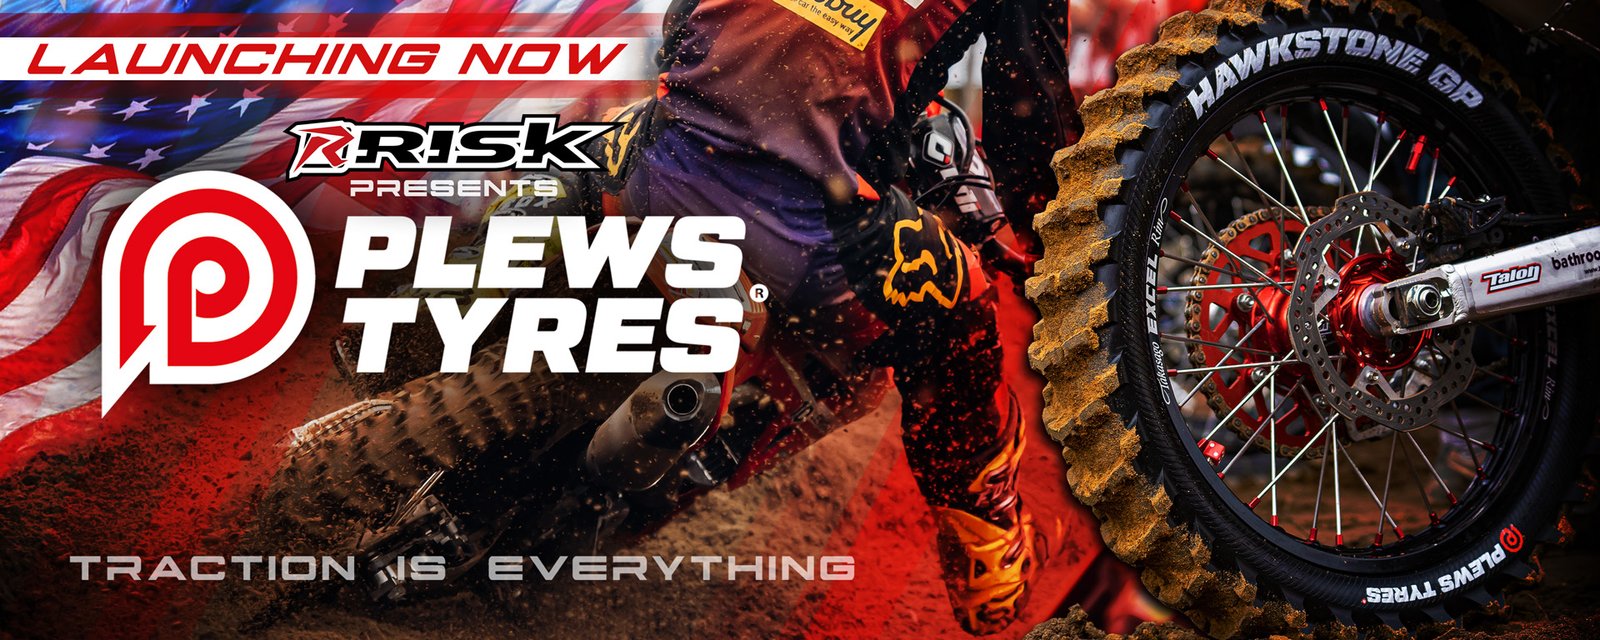 Plews Tyres Launch Banner featuring a motocross racer from the back leaning into a turn and throwing dirt. Also features a rear tire mounted on a bike and an American flag. Text reads: Launching Now. Risk presents Plews Tyres. Traction is Everything.